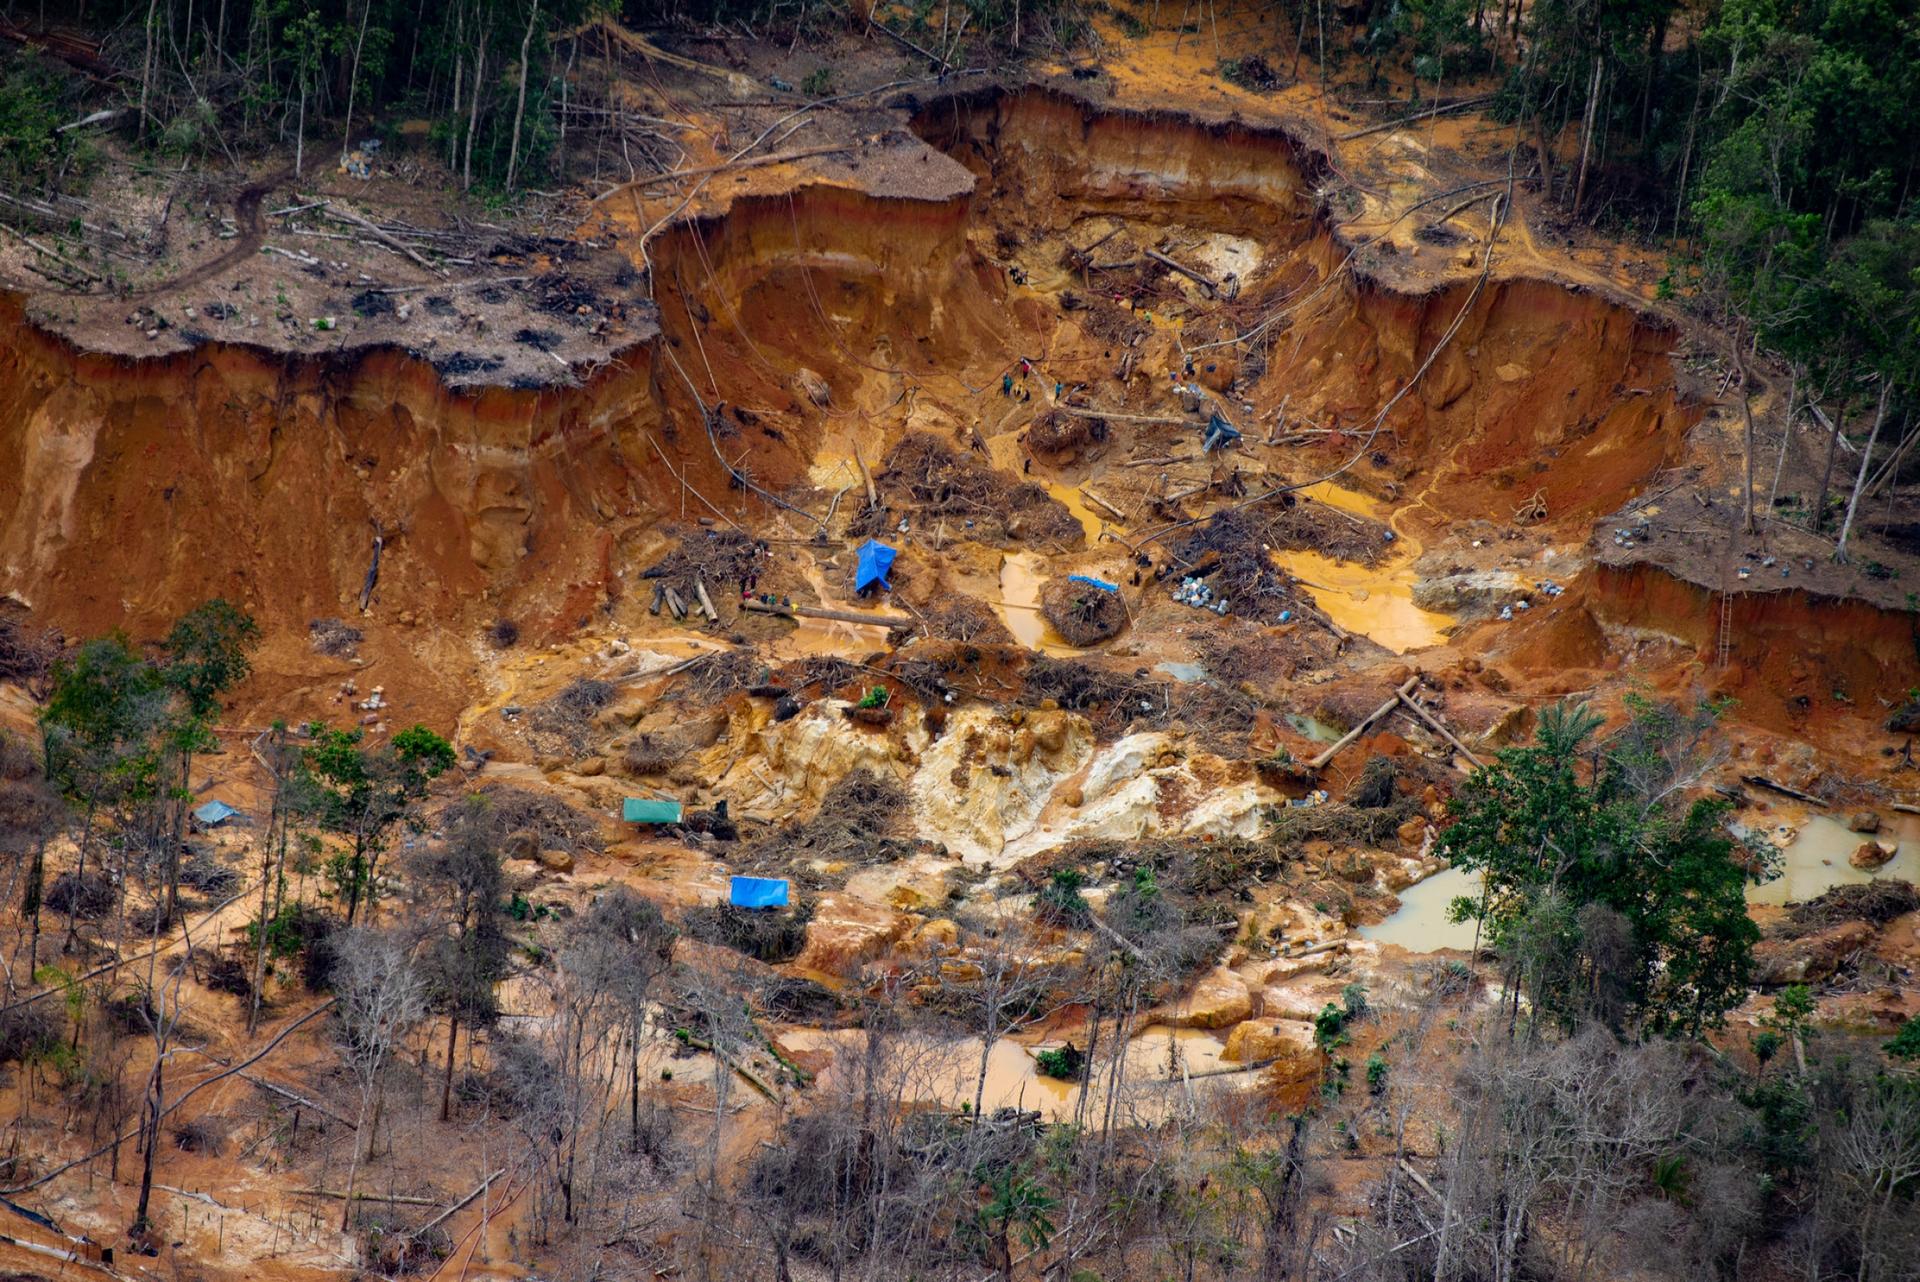  An illegal mining site in the Uraricoera River area of Yanomami land.